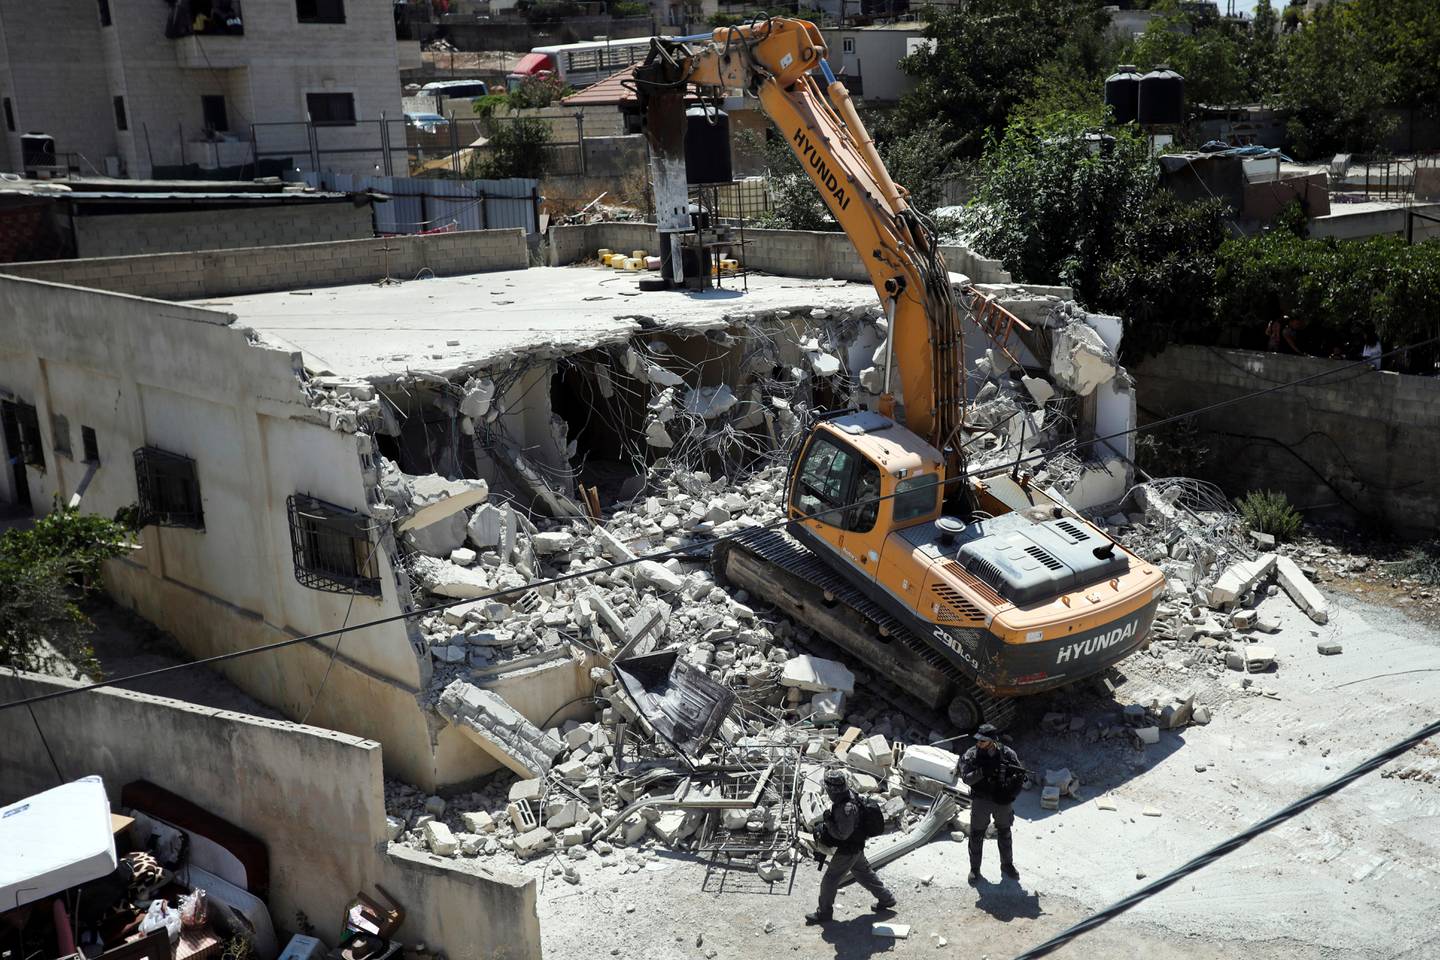 FILE - In this Aug. 21, 2019 file photo, Israeli authorities demolish a Palestinian owned house in east Jerusalem. A rights group says Israeli authorities have demolished at least 140 Palestinian homes in east Jerusalem this year, the highest annual number since it began keeping records in 2004. The demolition of homes built without permits comes amid a major increase in Jewish settlement activity both in east Jerusalem and in the occupied West Bank since U.S. President Donald Trump took office.(AP Photo/Mahmoud Illean, File)